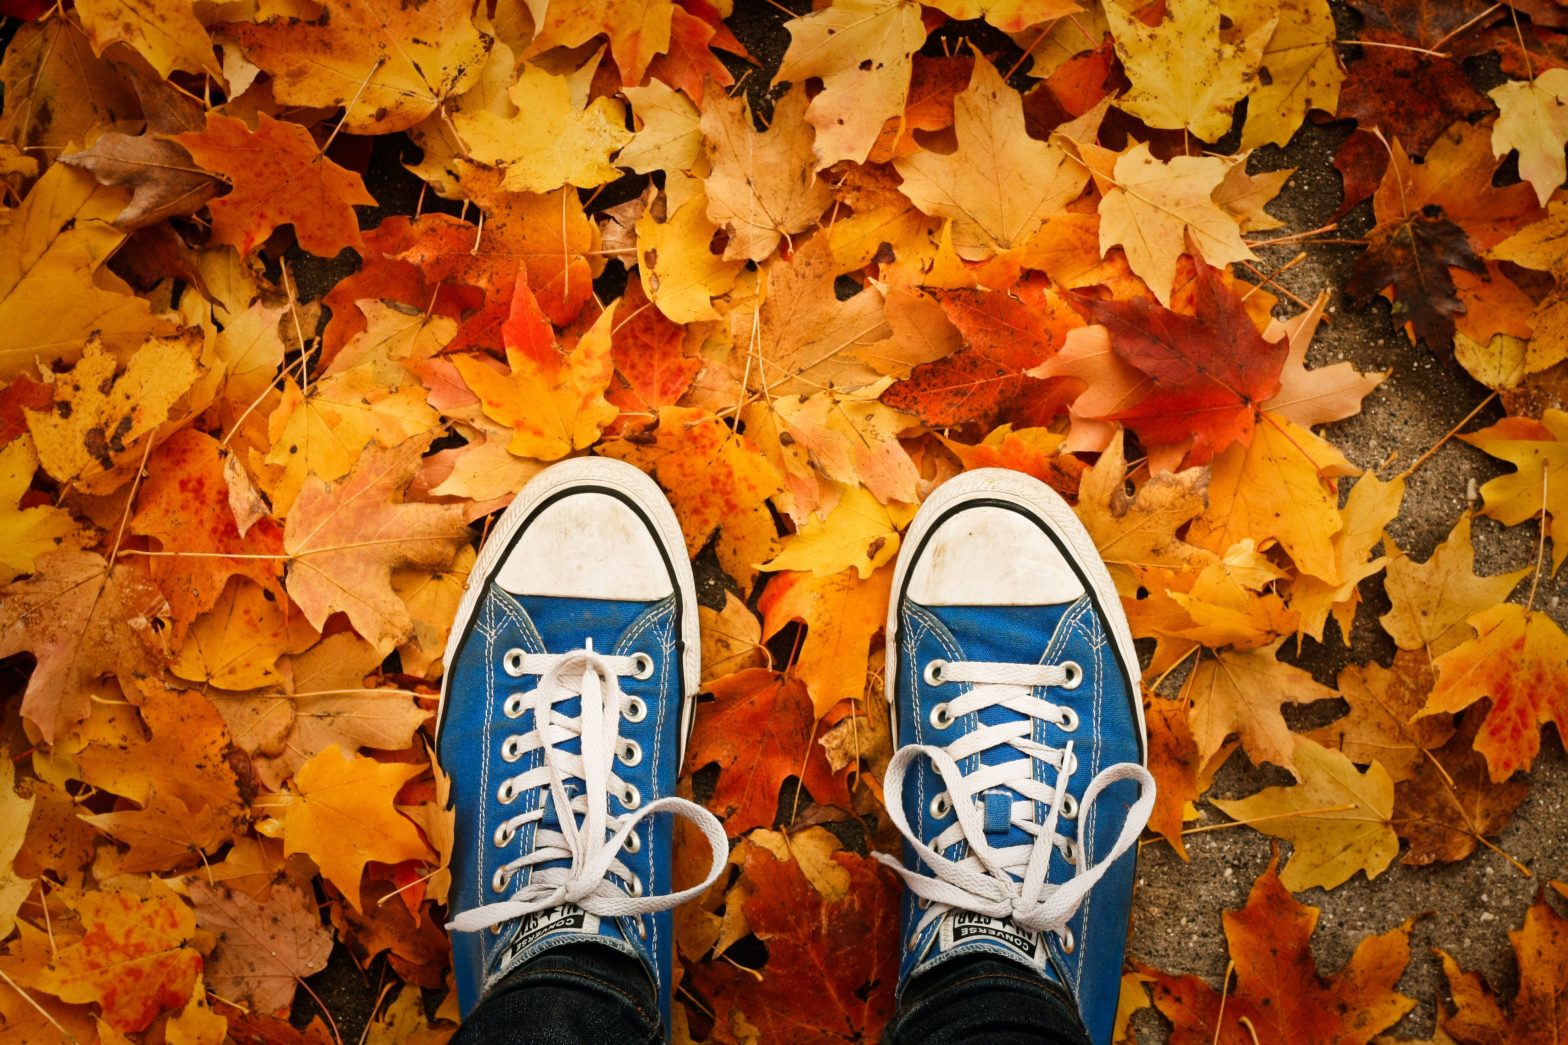 Tips For Traveling This Fall Season